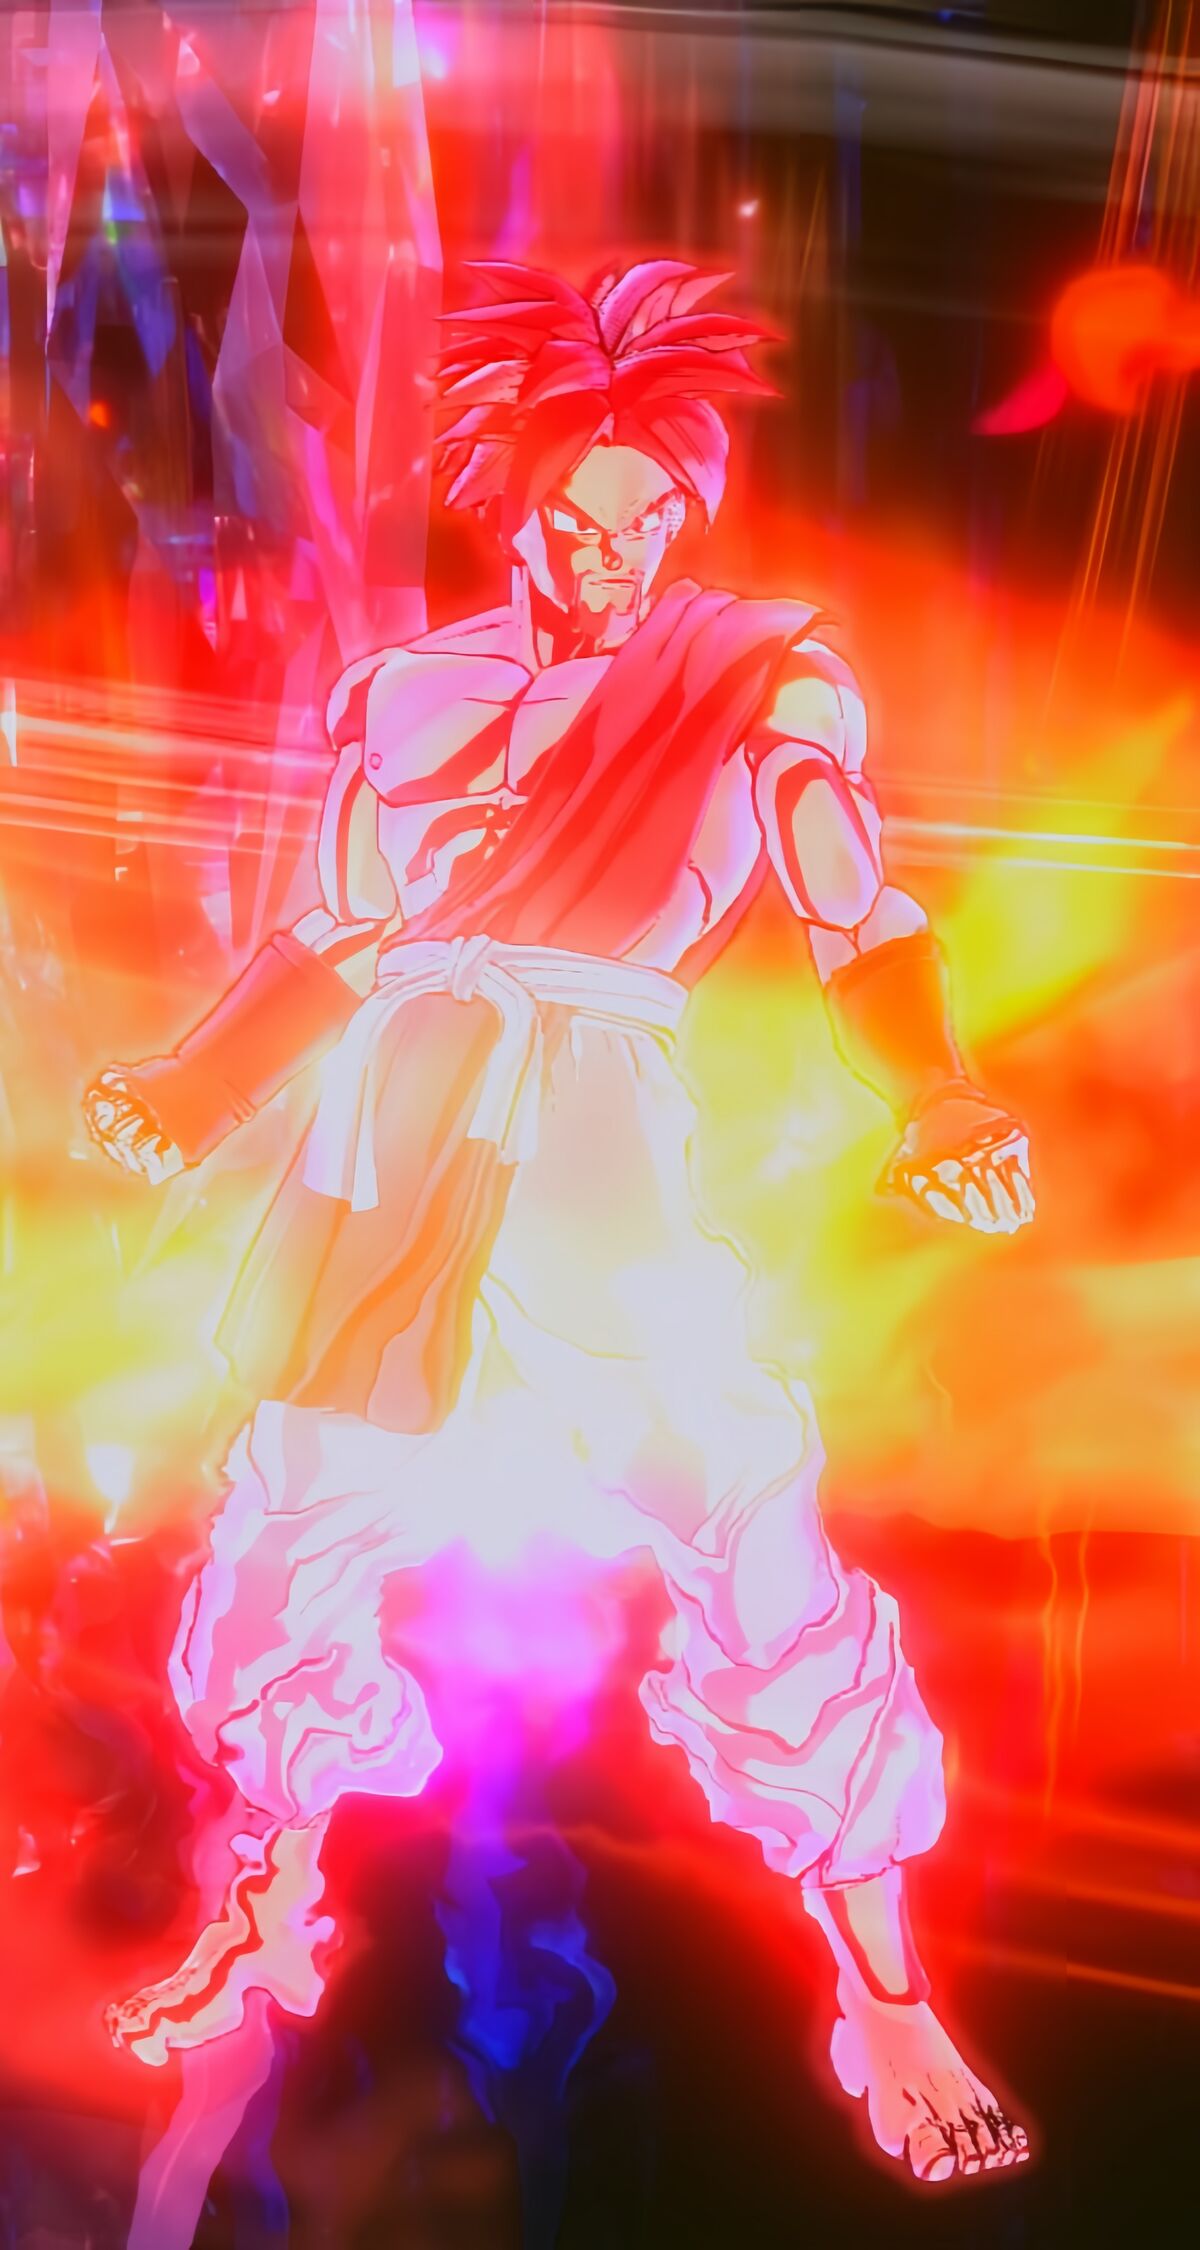 How to Get Super Saiyan God in Xenoverse 2